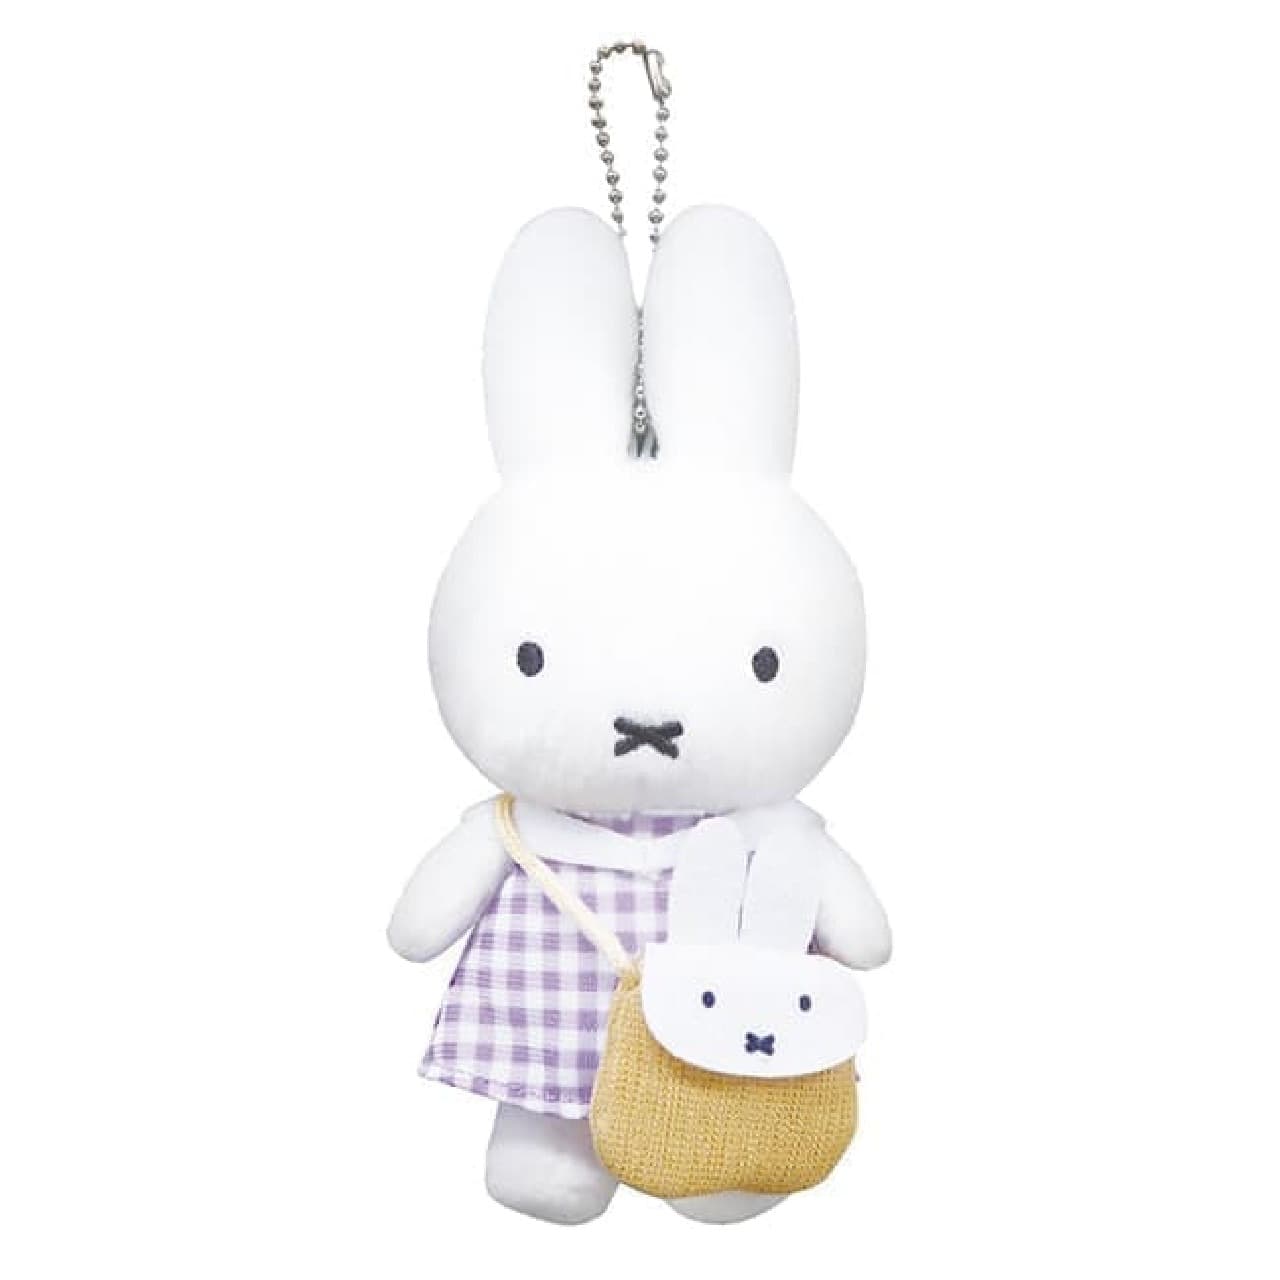 "Miffy zakka Festa" held at Seibu Ikebukuro --Limited goods and photo spots that first appeared in Japan